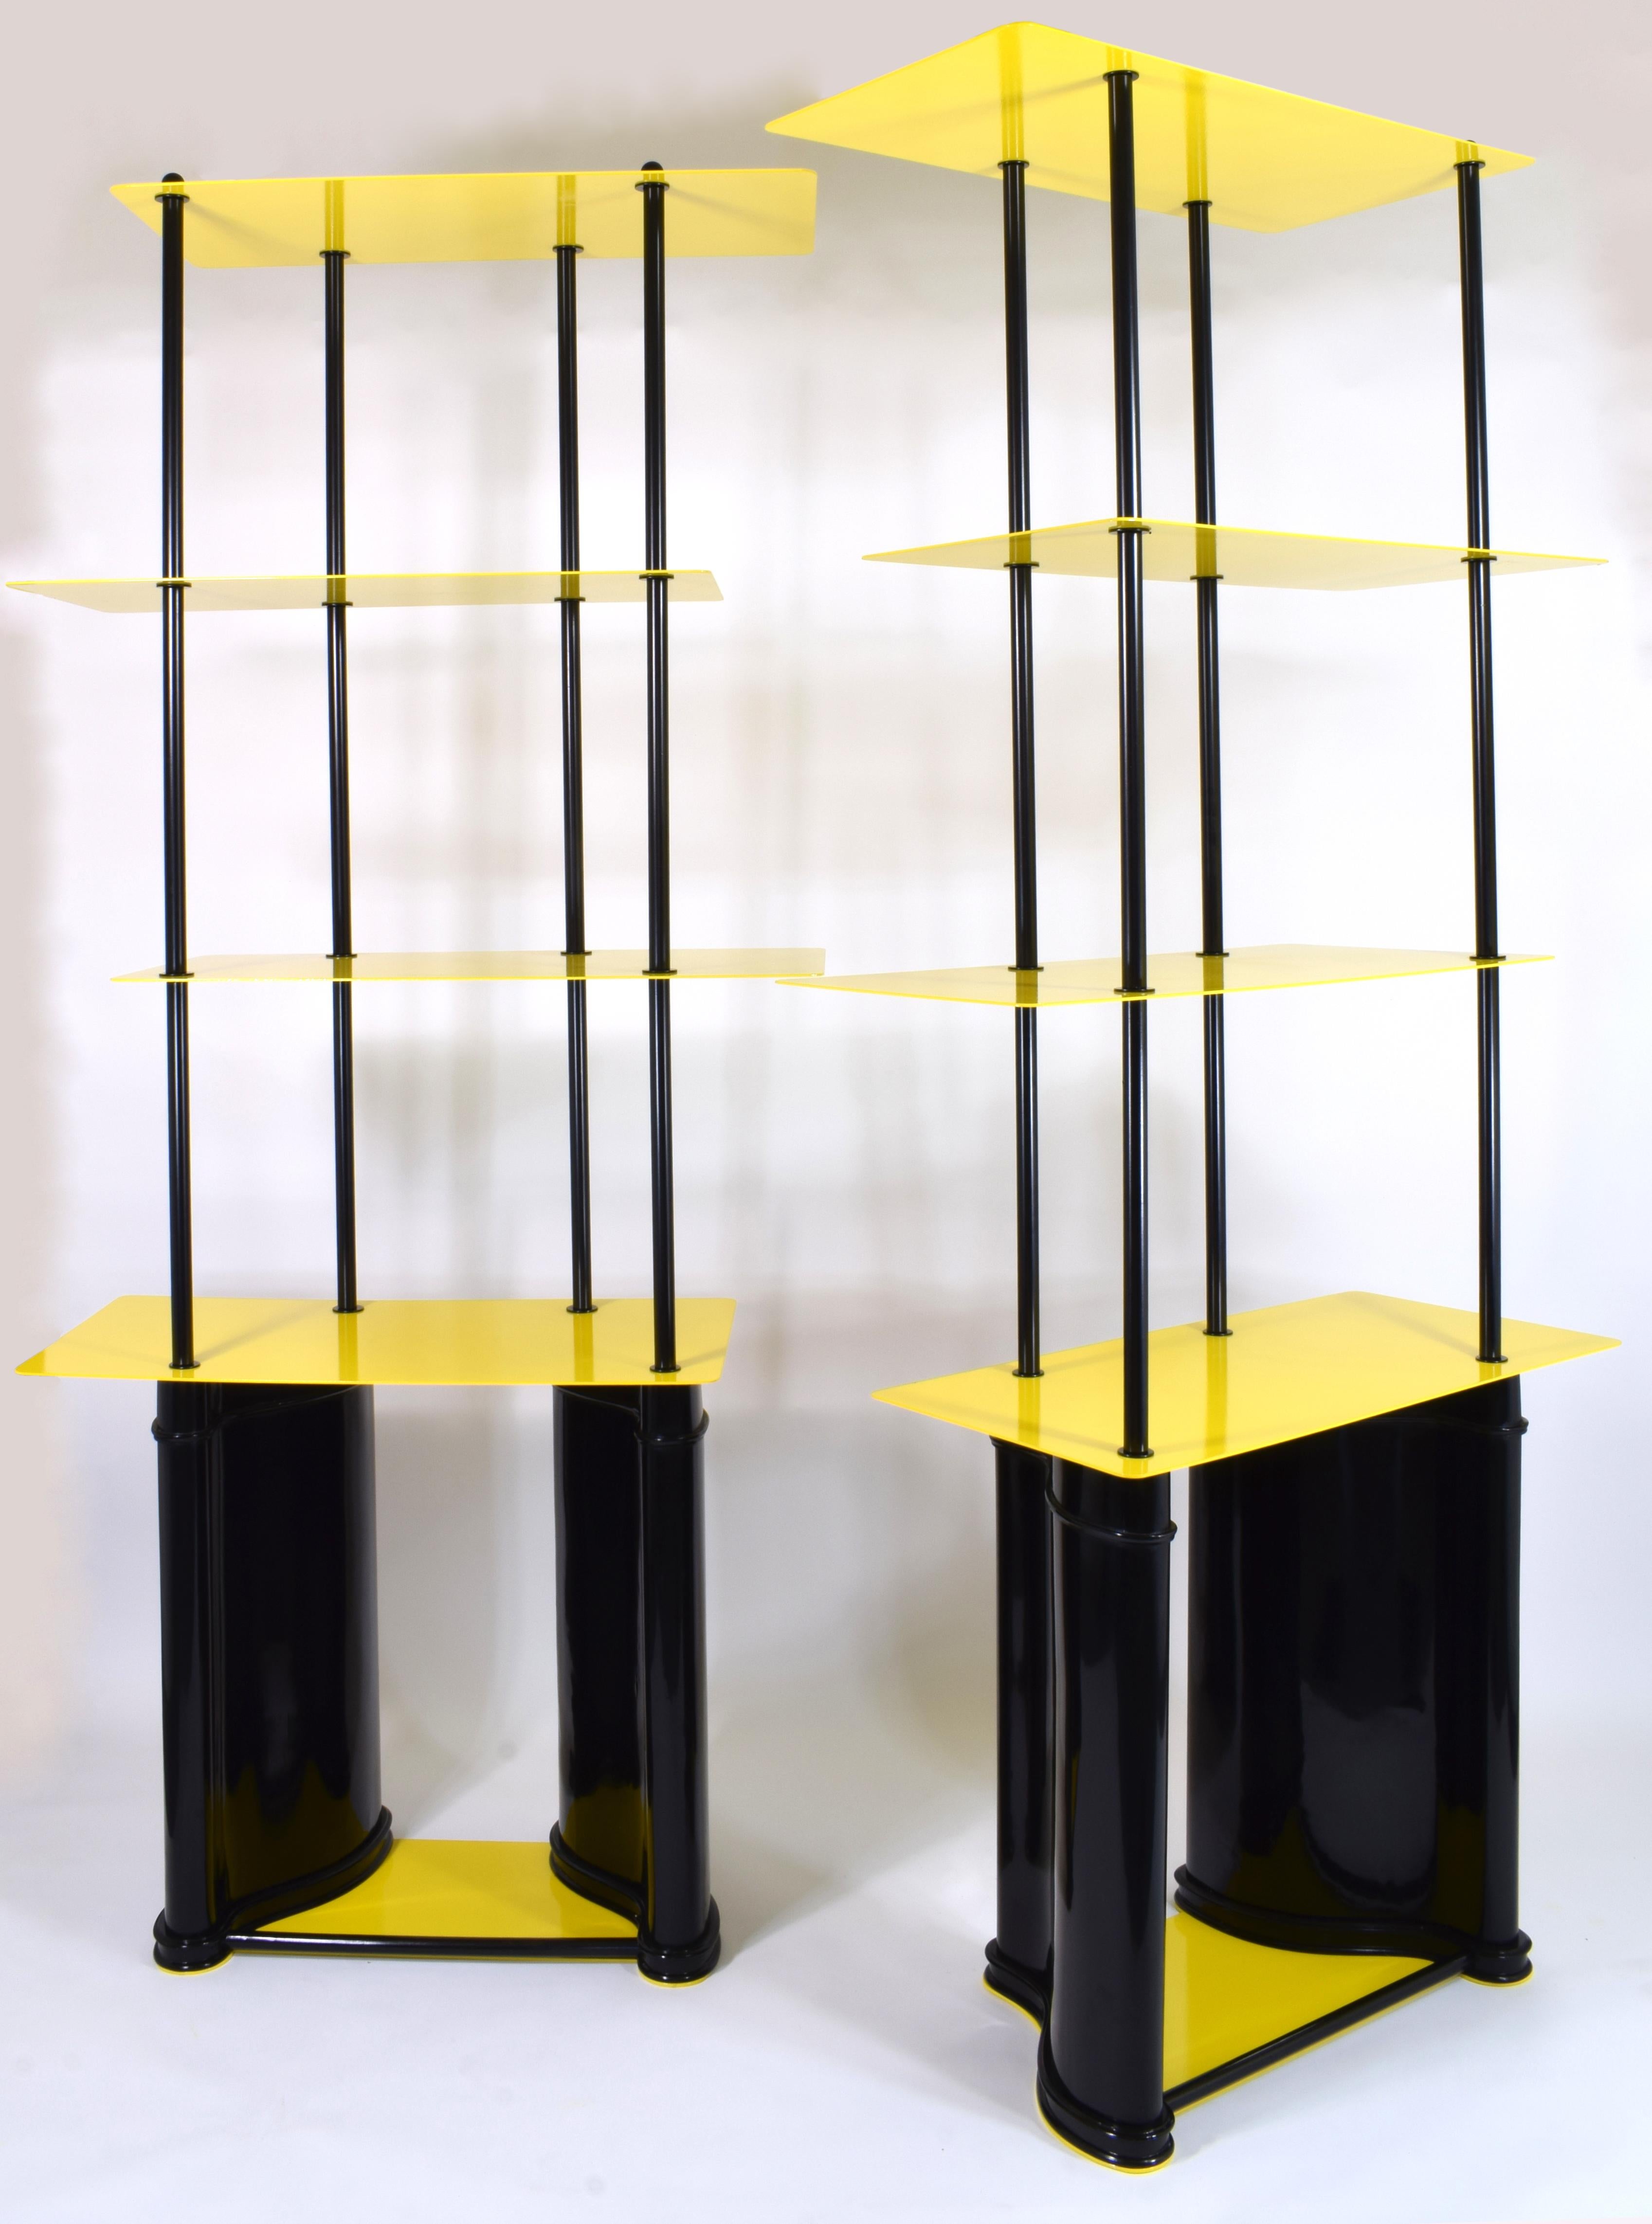 Pair of “DilàDiquà” bookcases from the “Trasformatio” collection,
design Michele Iodice exclusively for the Esprit Nouveau gallery.

Limited Edition 2/2

Movable structures in black and yellow pre-painted iron,
bases in shaped and ebonized